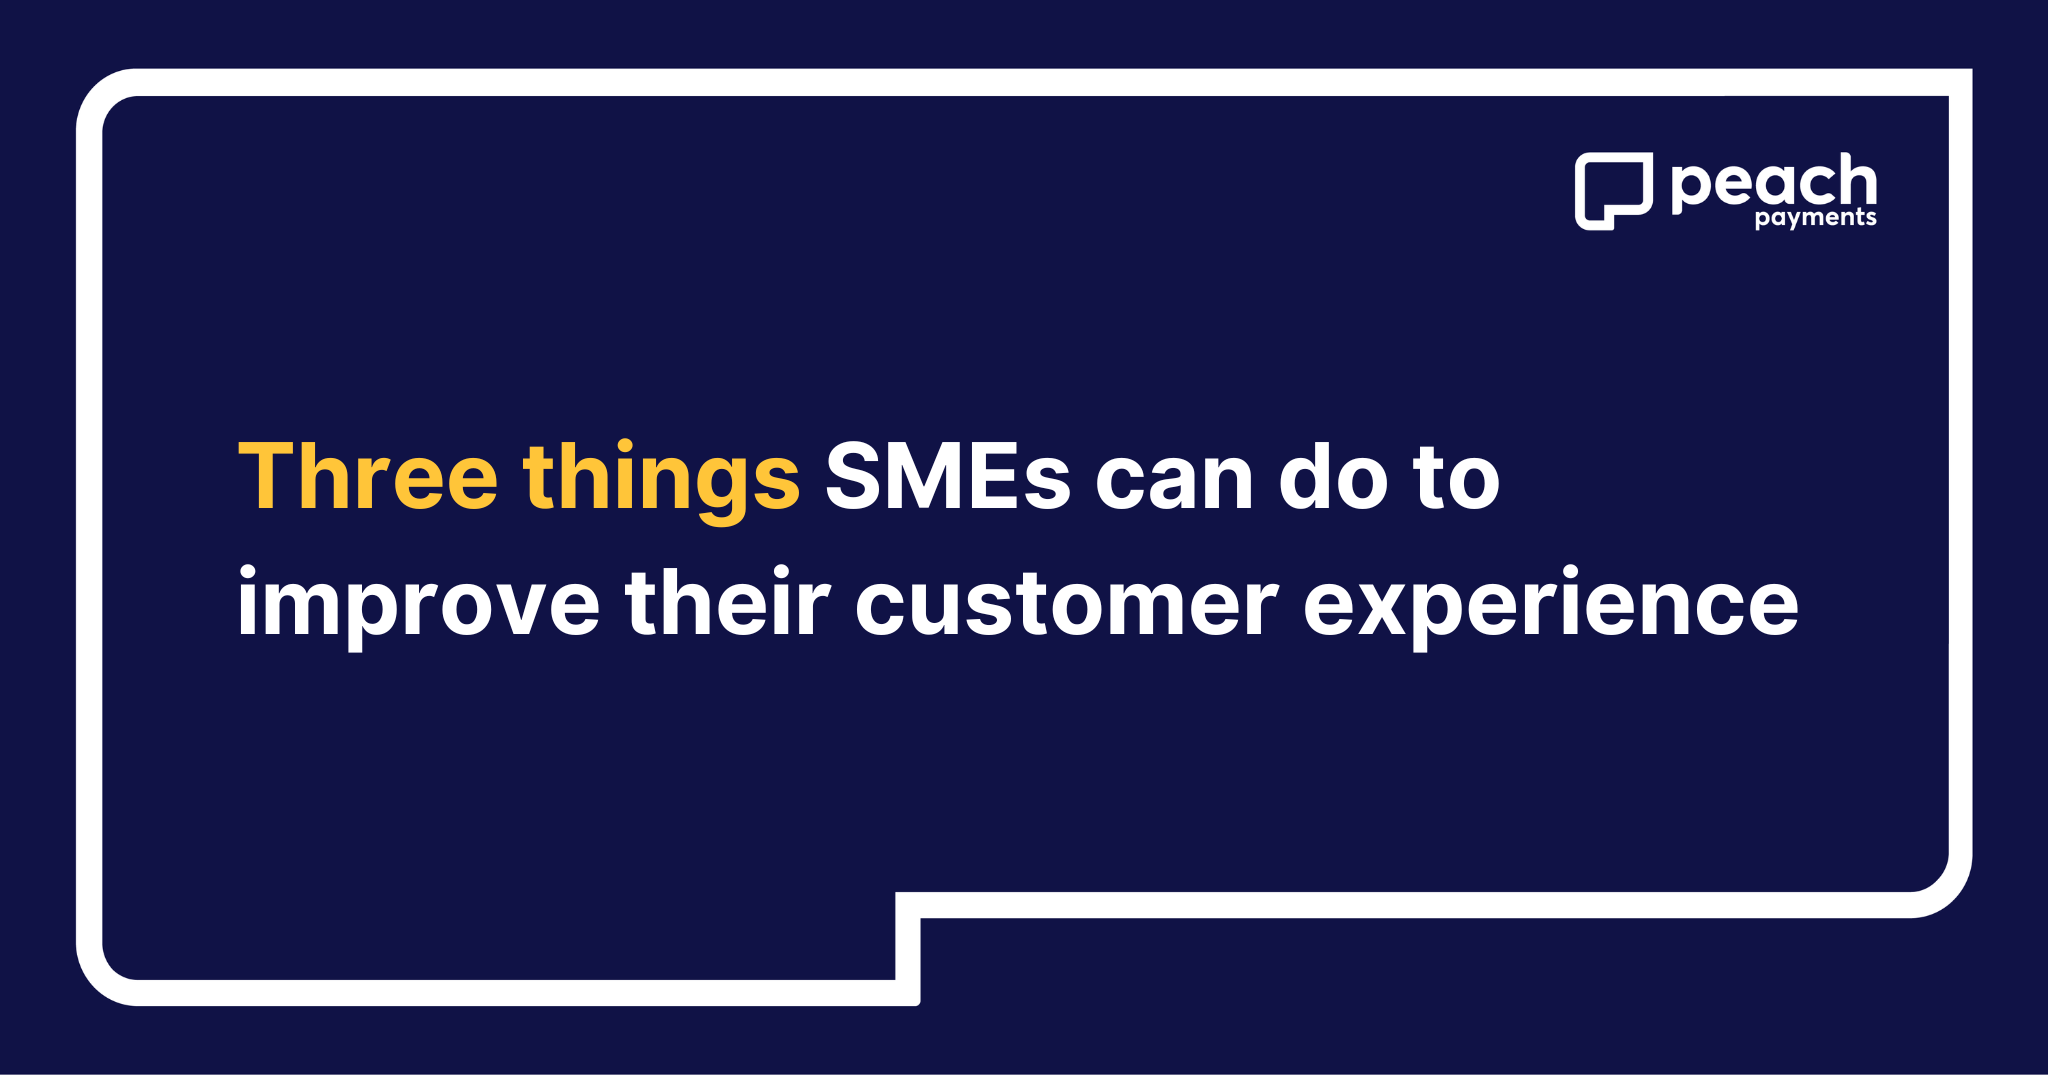 3 things small businesses can do to improve their customer experience